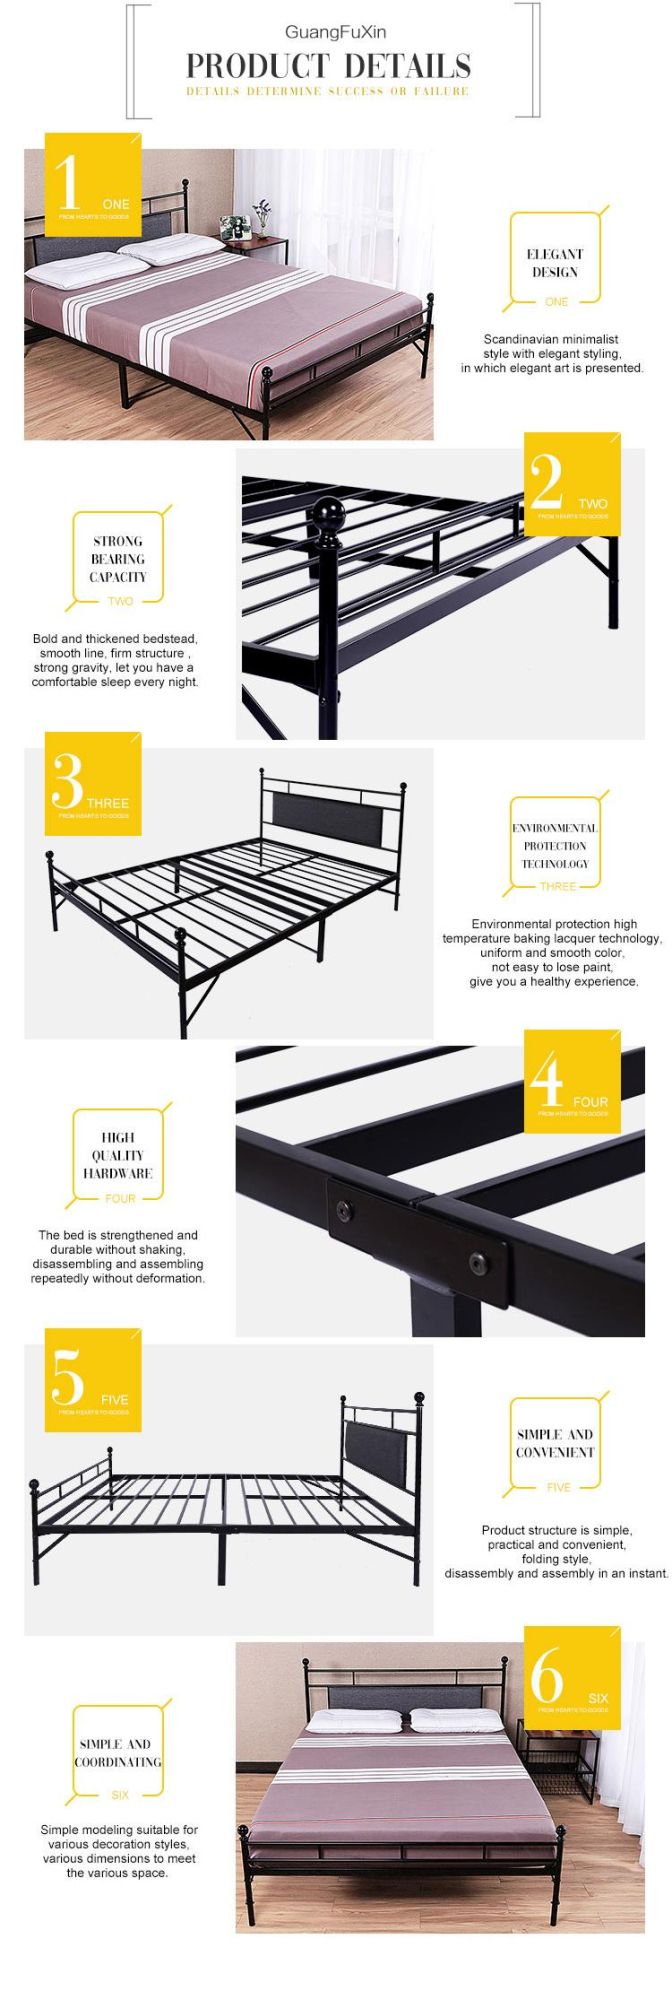 Easy to Use Popular Home Folding Iron Bed Frame